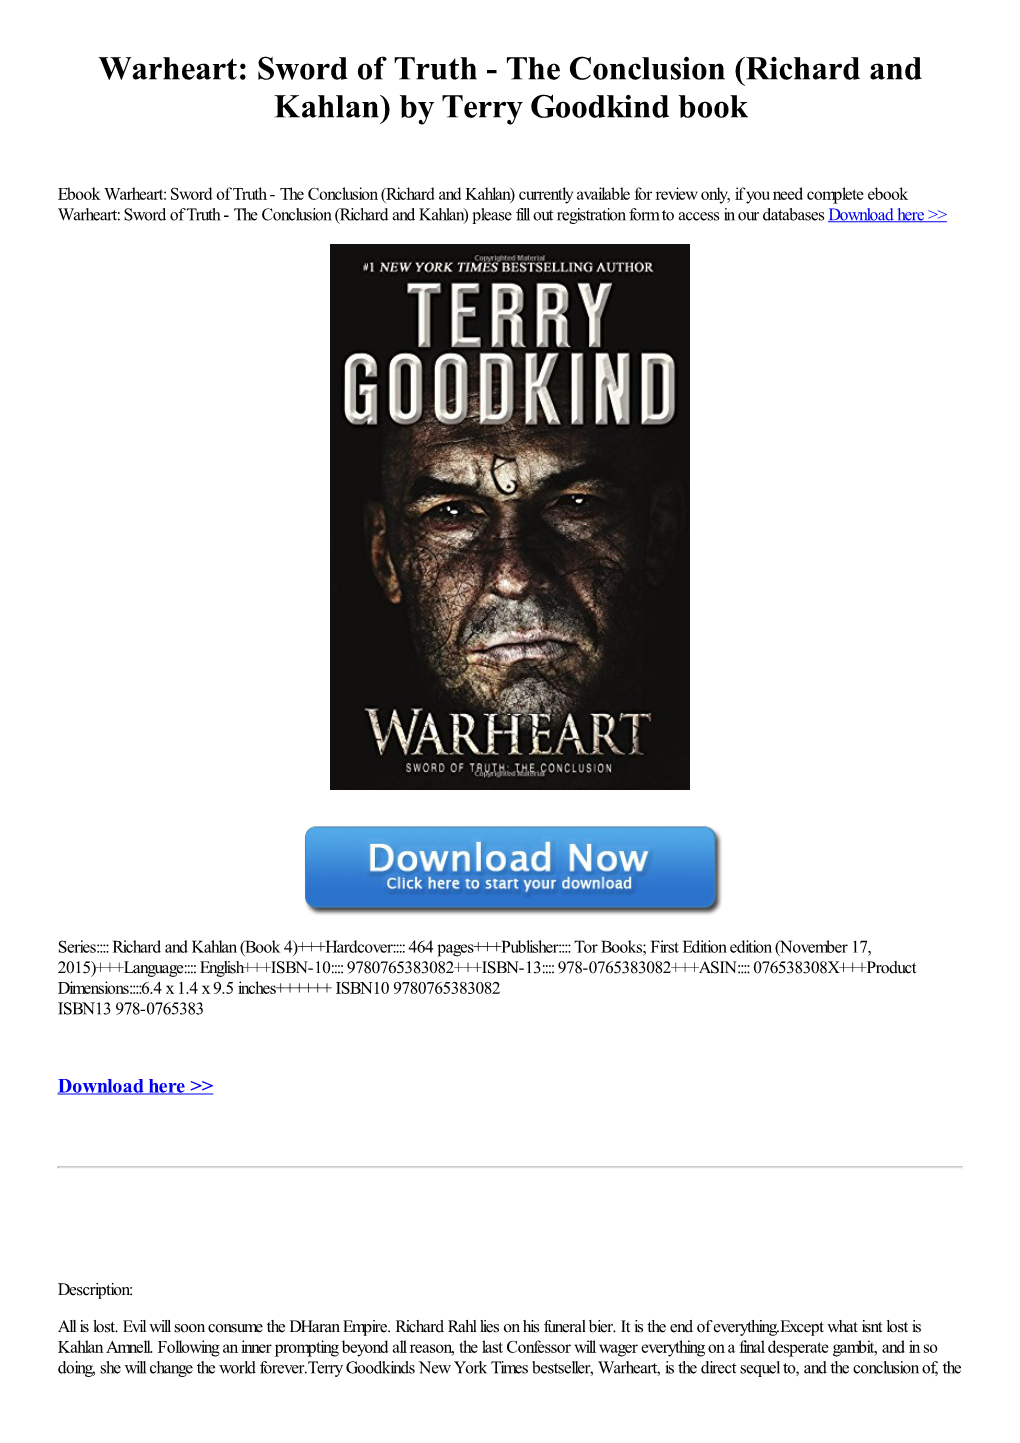 Warheart: Sword of Truth - the Conclusion (Richard and Kahlan) by Terry Goodkind Book